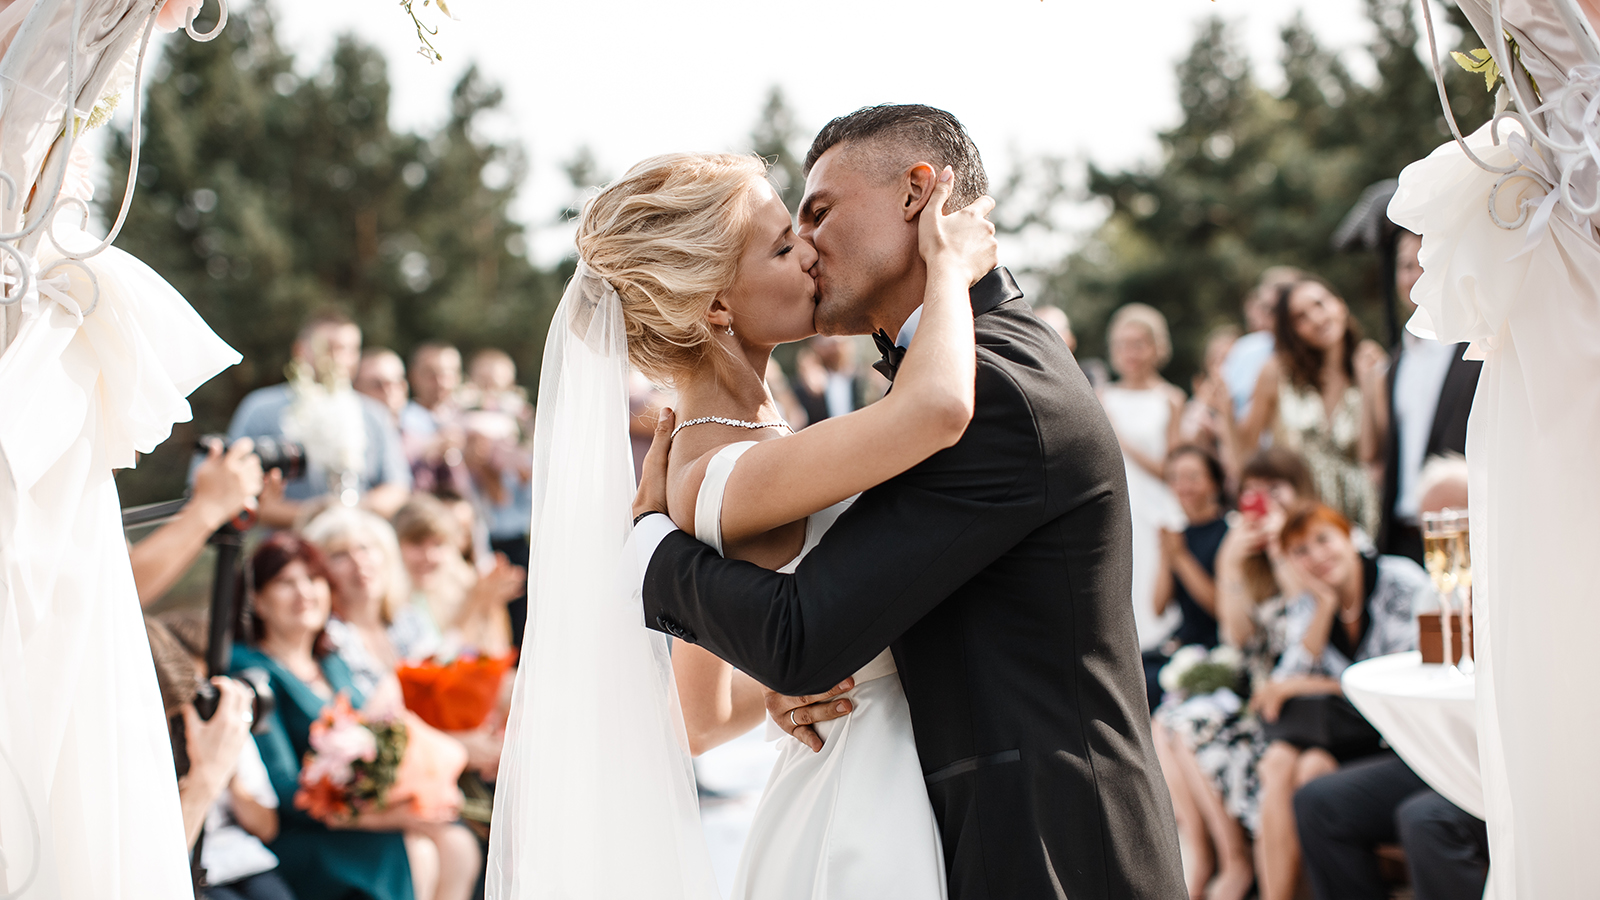 A bride and a groom are kissing in front of the guests.